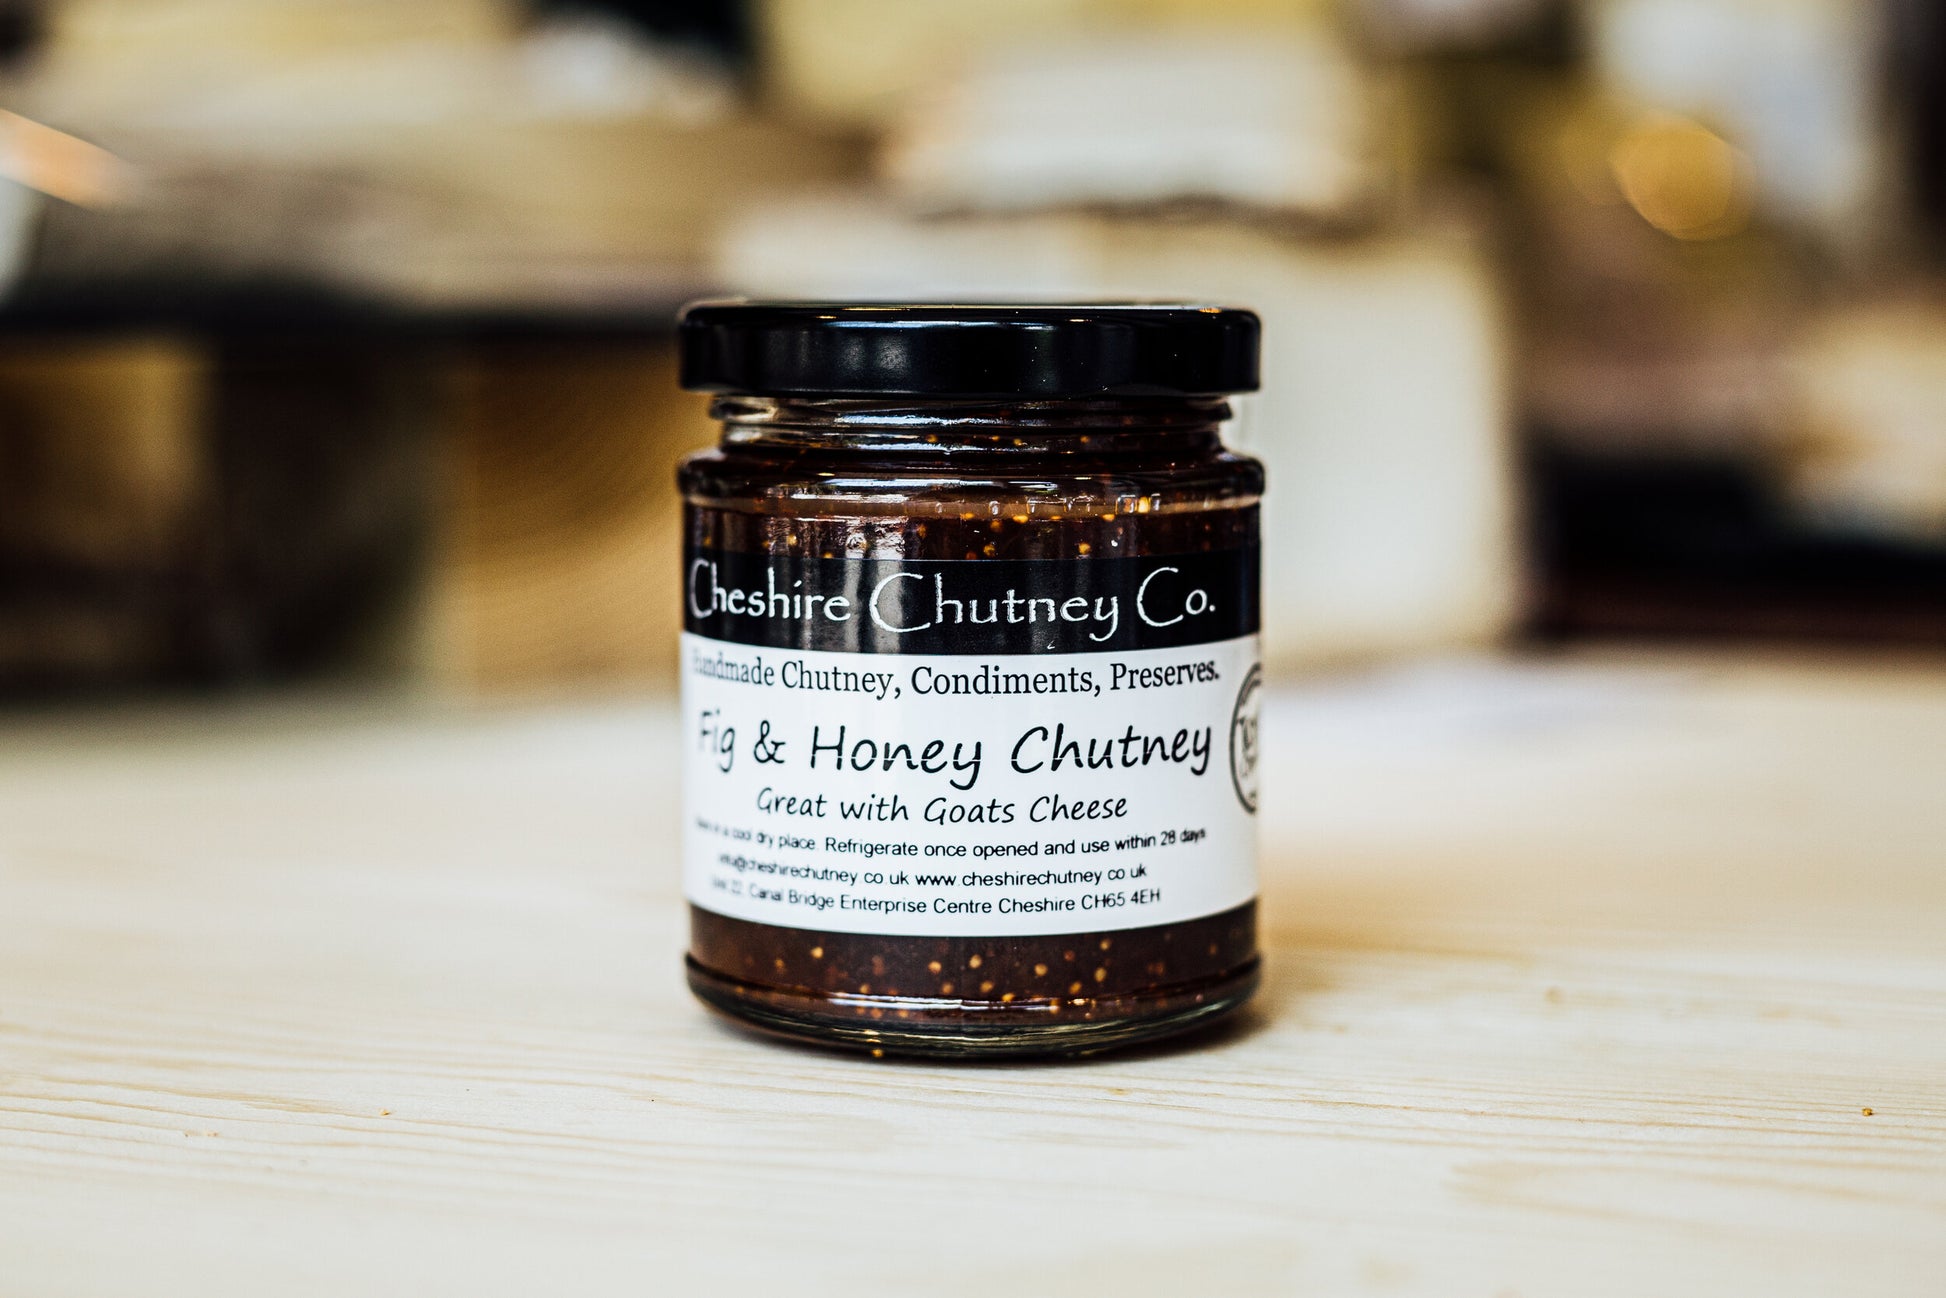 A jar of textured Fig & Honey Chutney in traditional packaging, with the emblem 'great with goats cheese'.